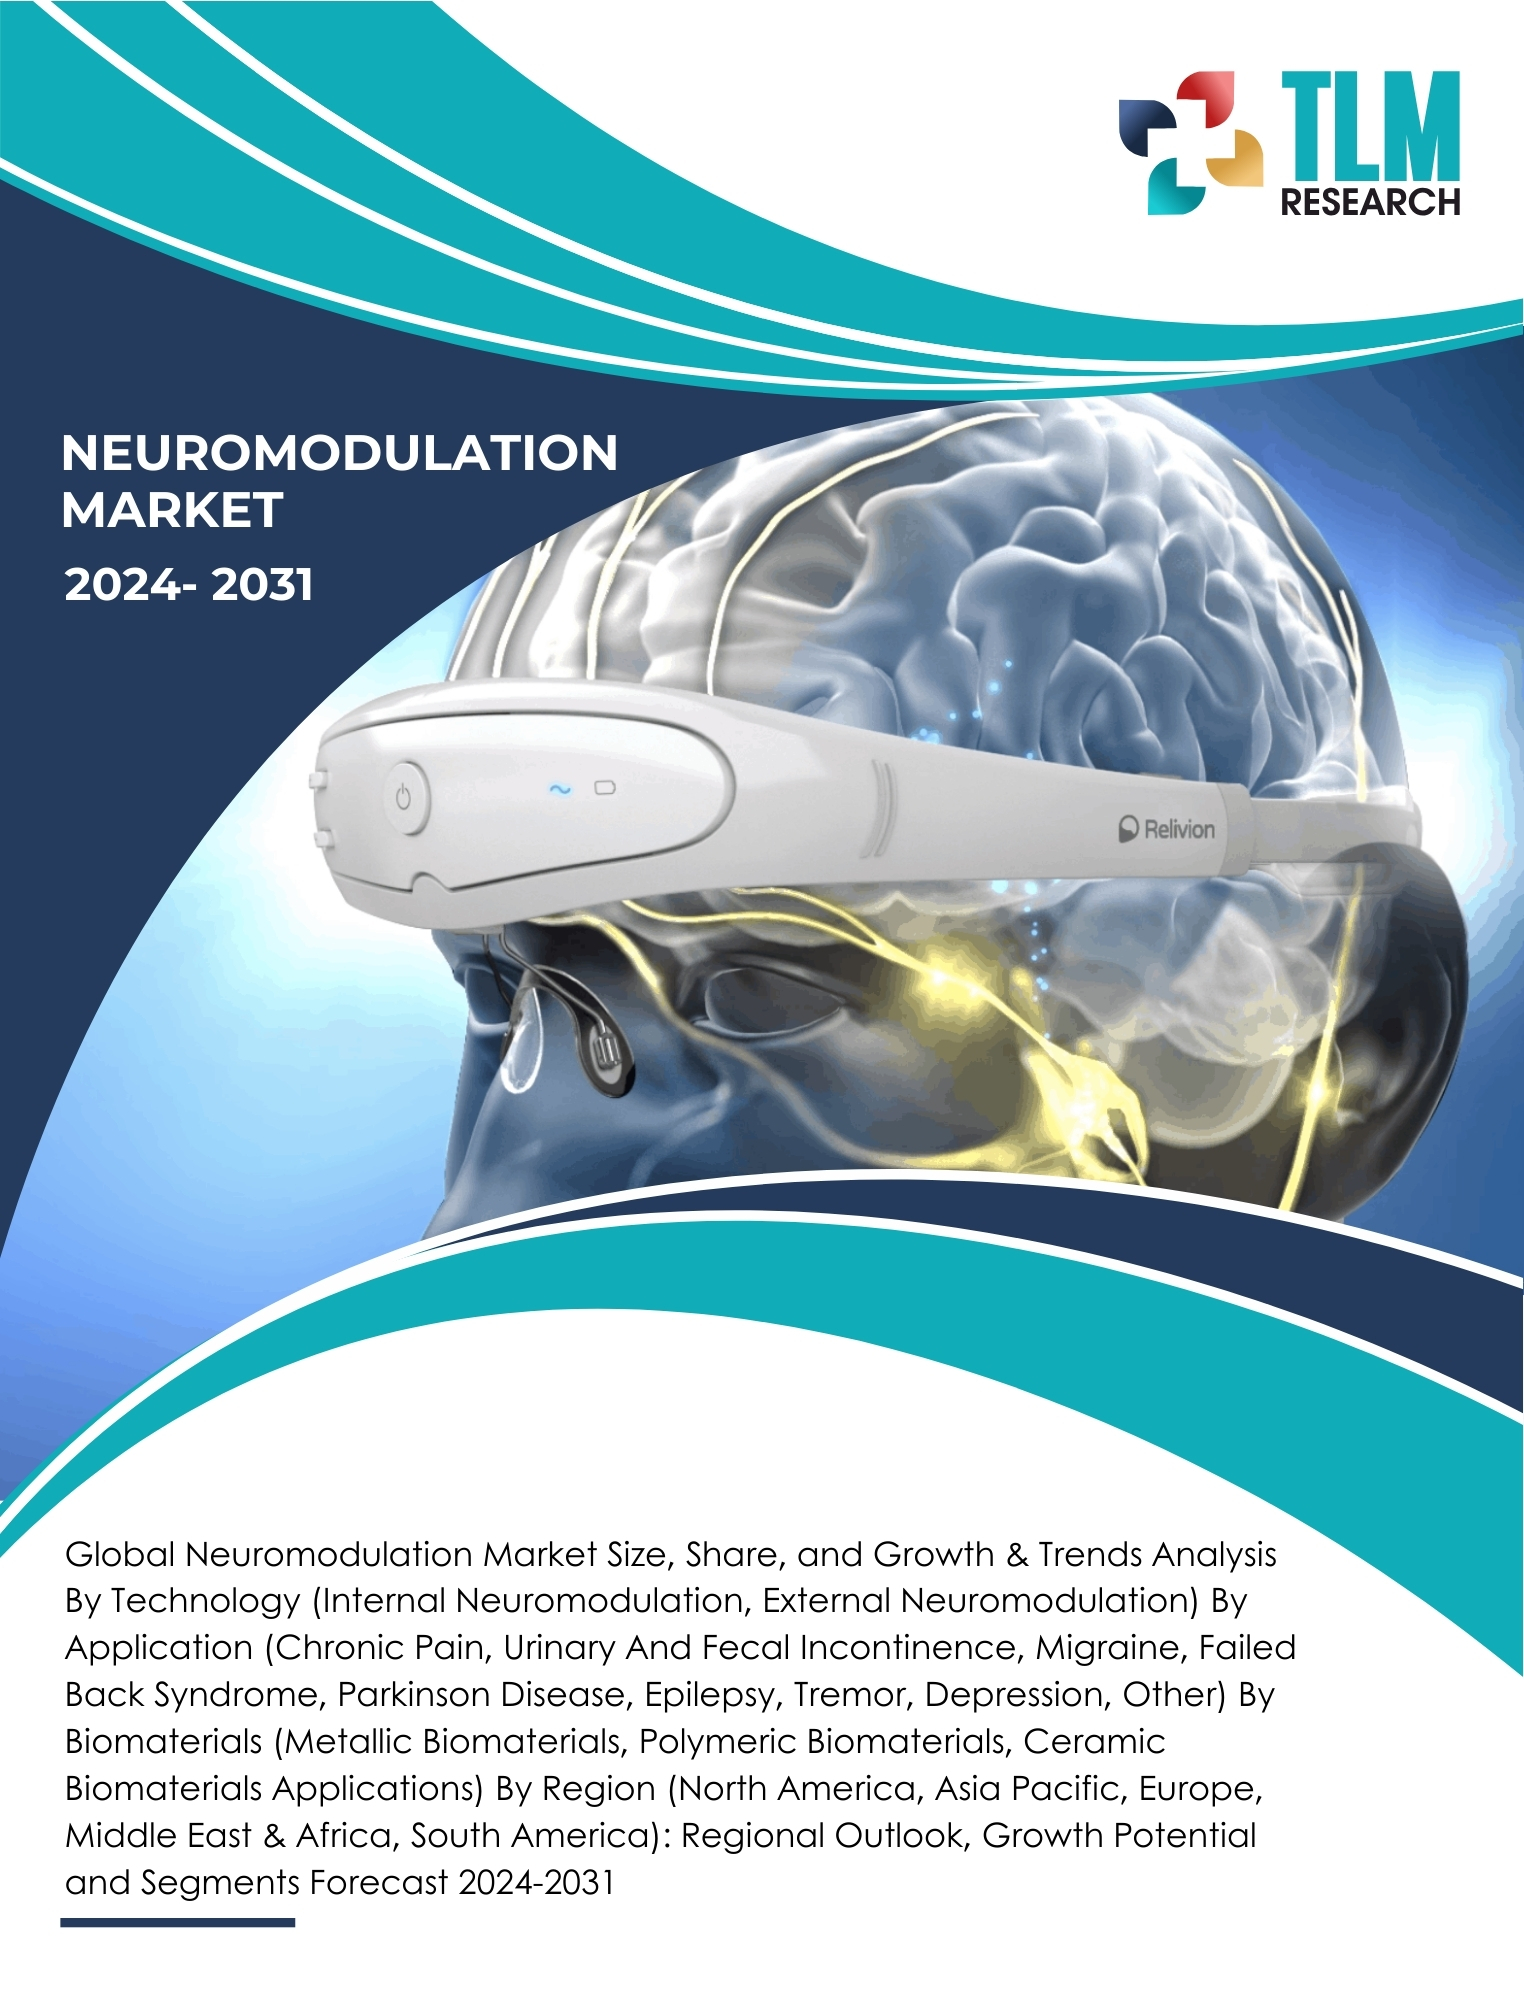 Neuromodulation Market Growth & Trends Analysis 2031 | TLM Research